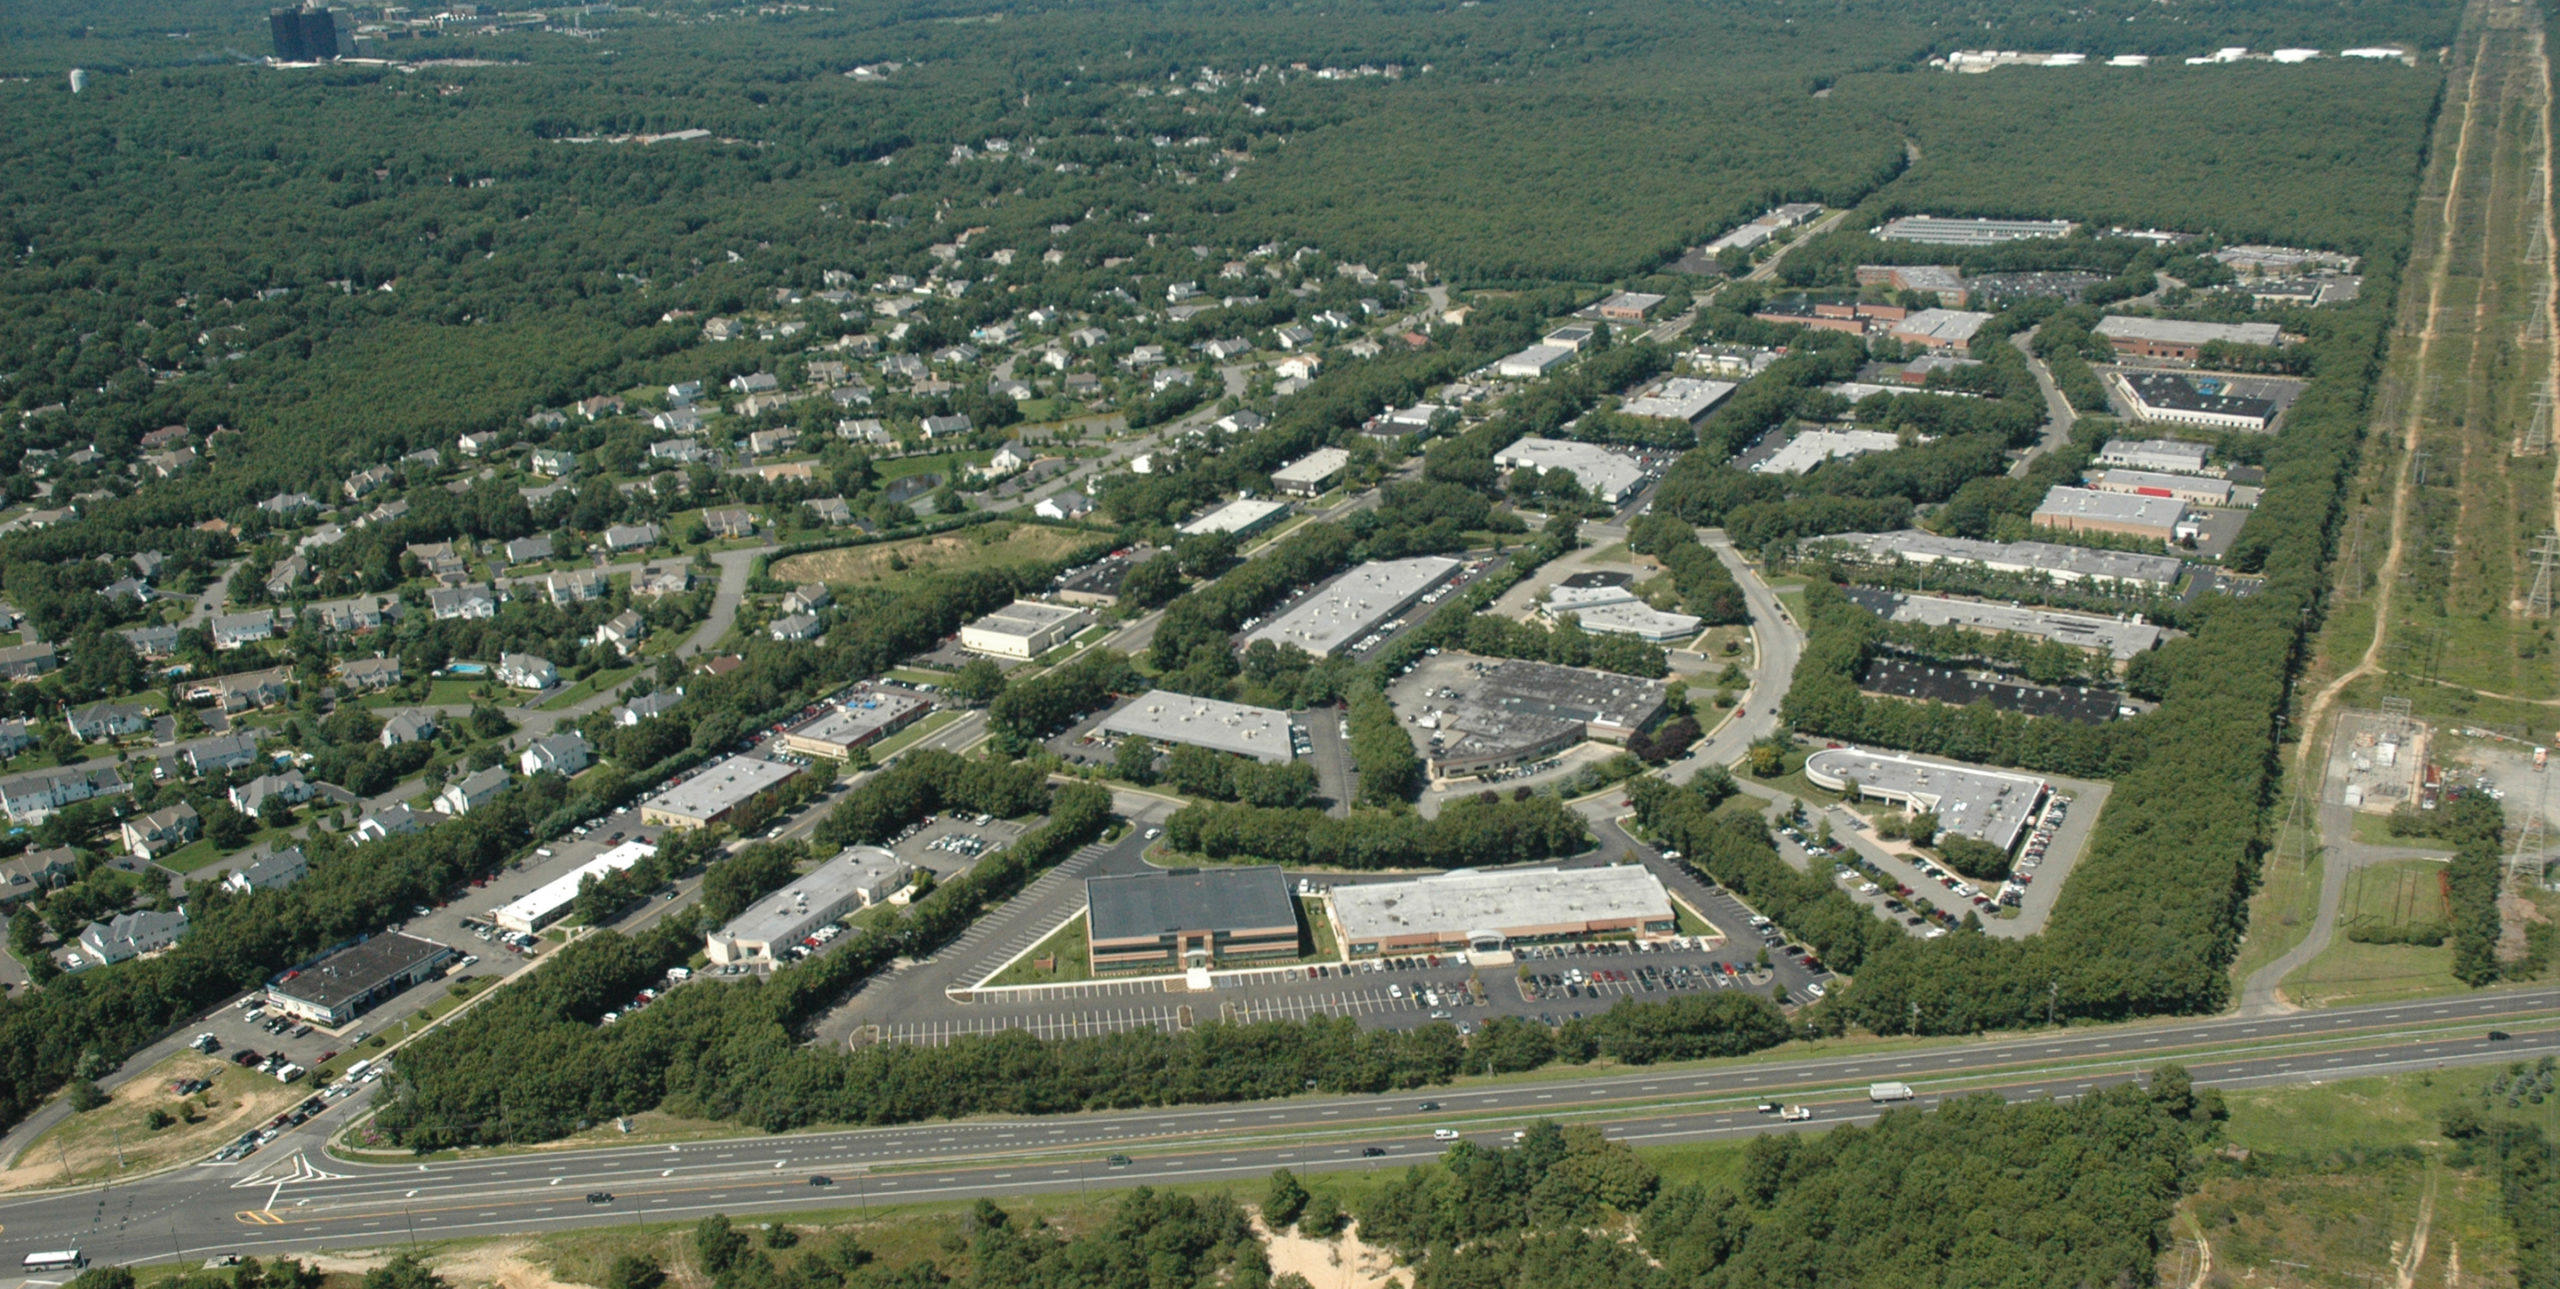 Aerial view of Stony Brook Technology Center